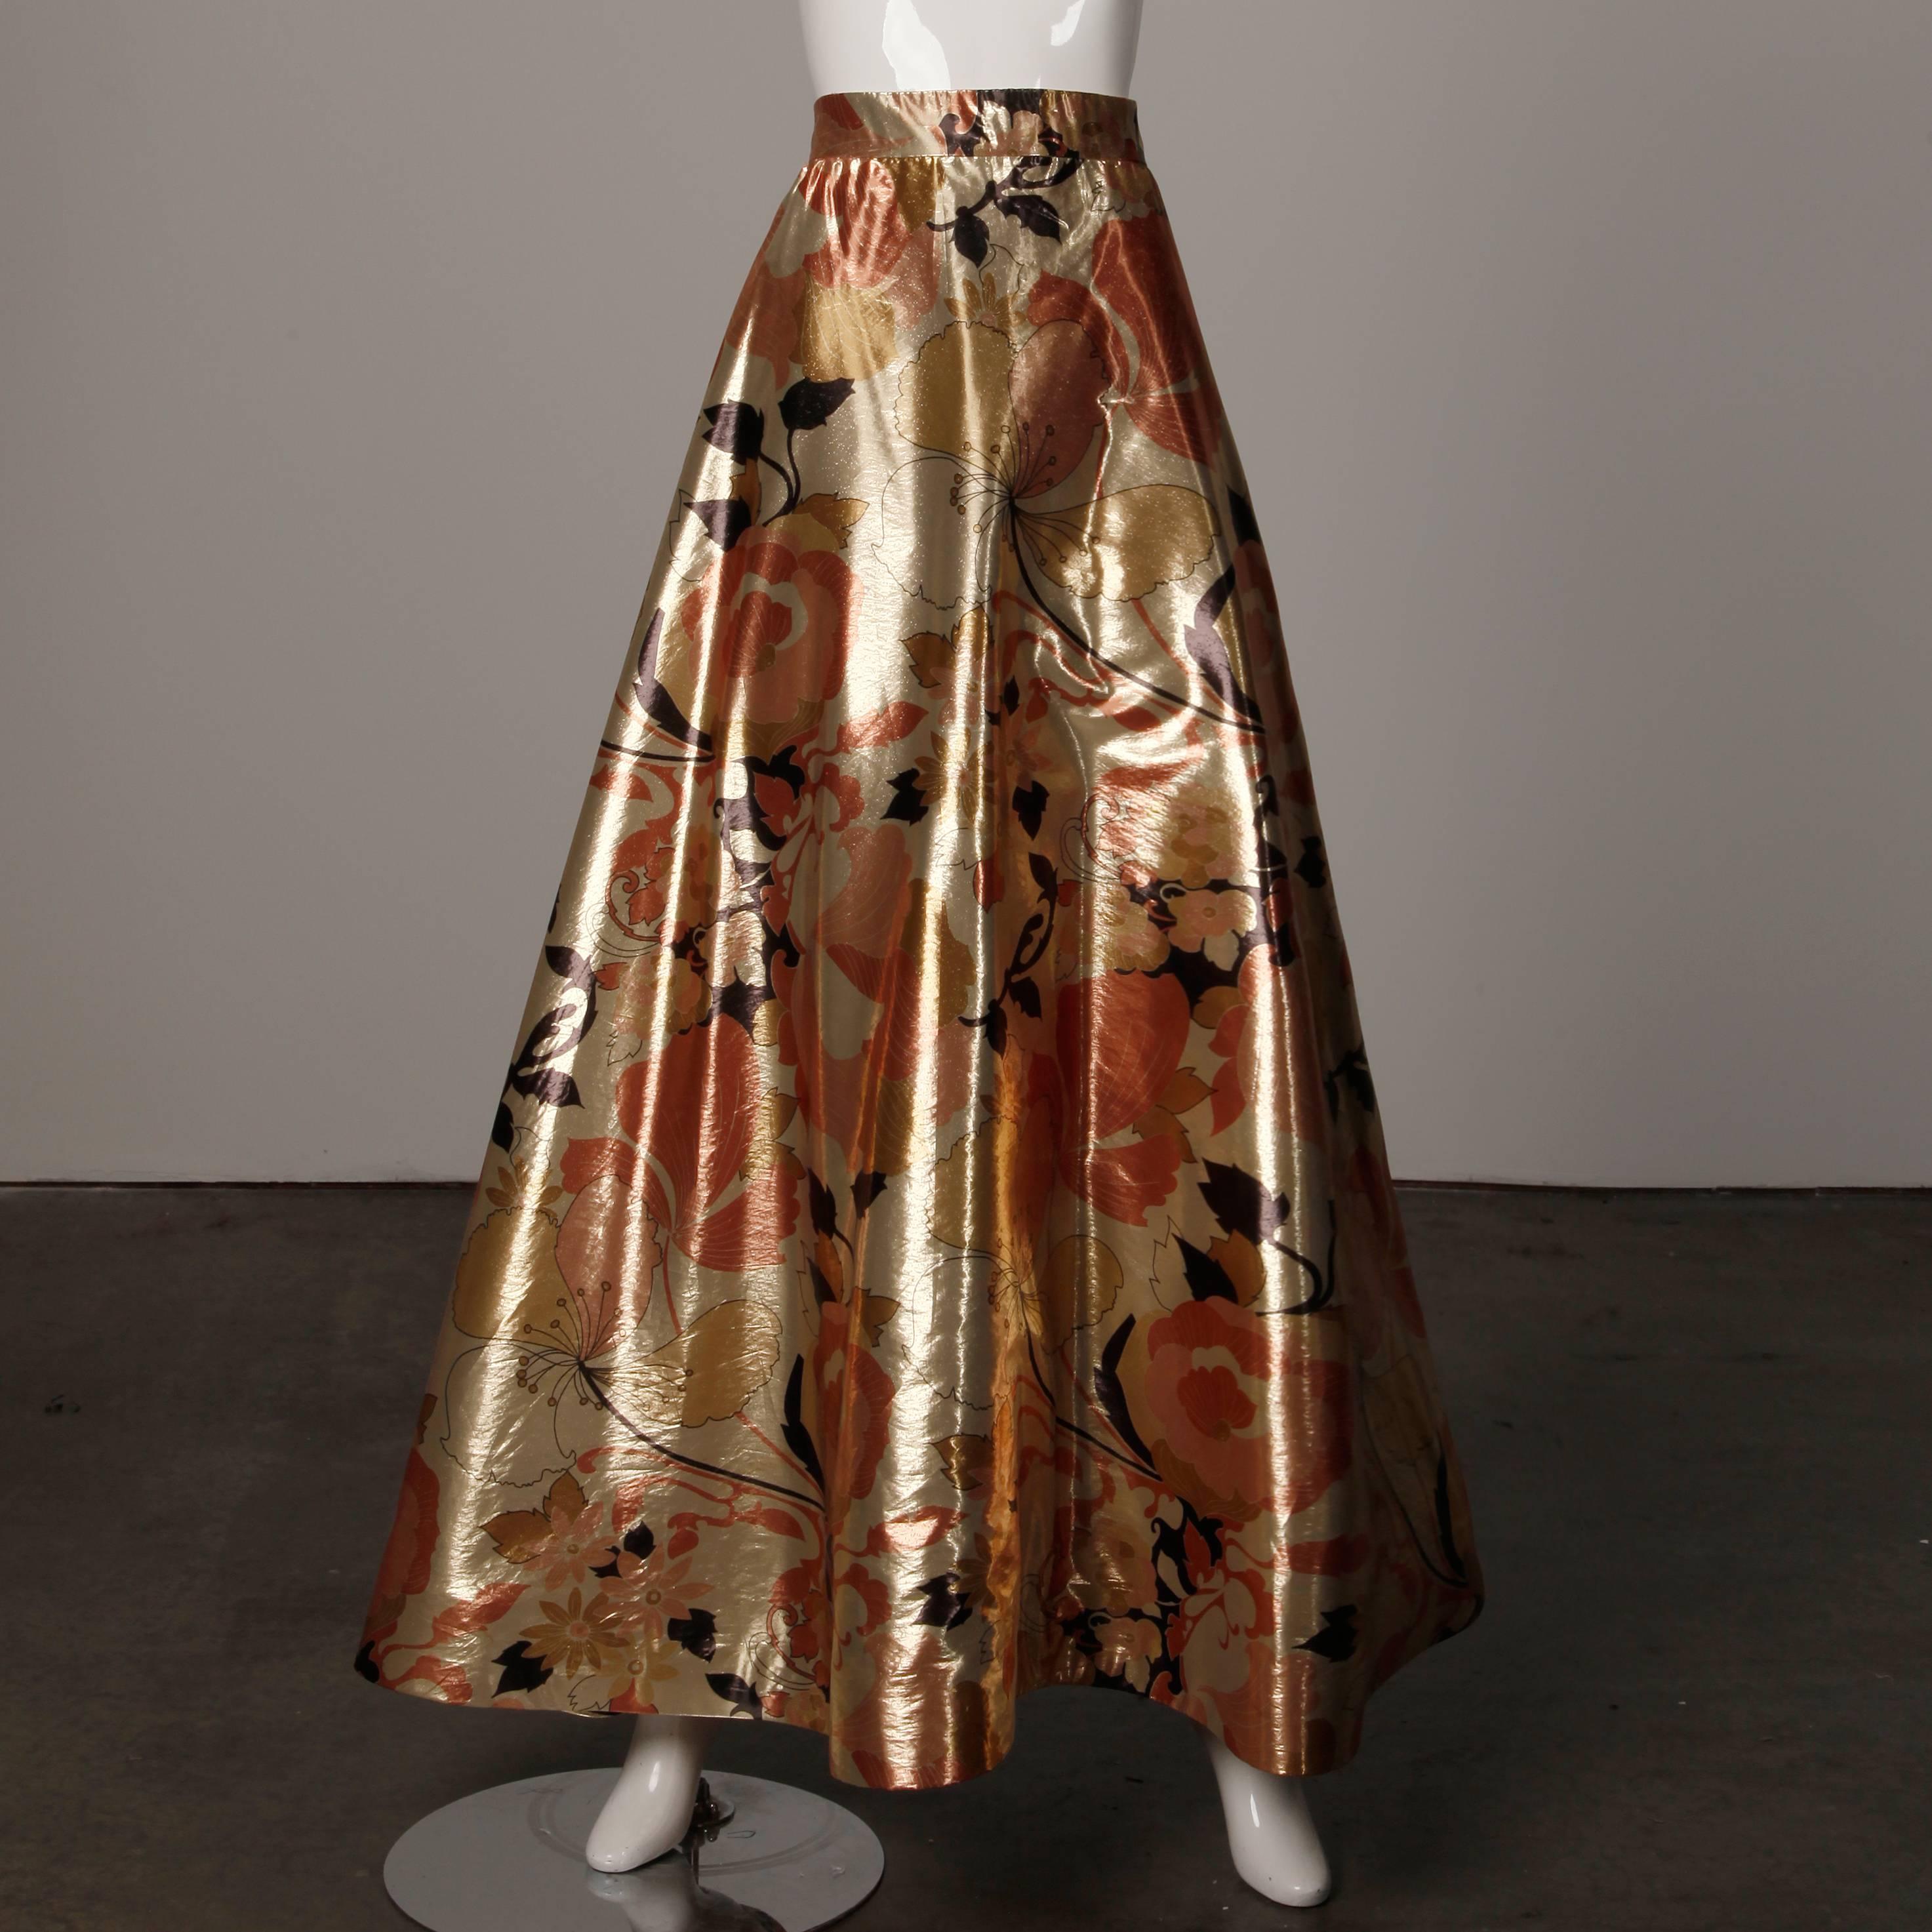 Stunning vintage 1970s 2-piece evening dress ensemble by Arnold Scaasi in metallic gold printed silk lamé. This ensemble fits like a modern size XS. The top is fully lined with rear zip and hook closure. Boning in back. The bust measures 32